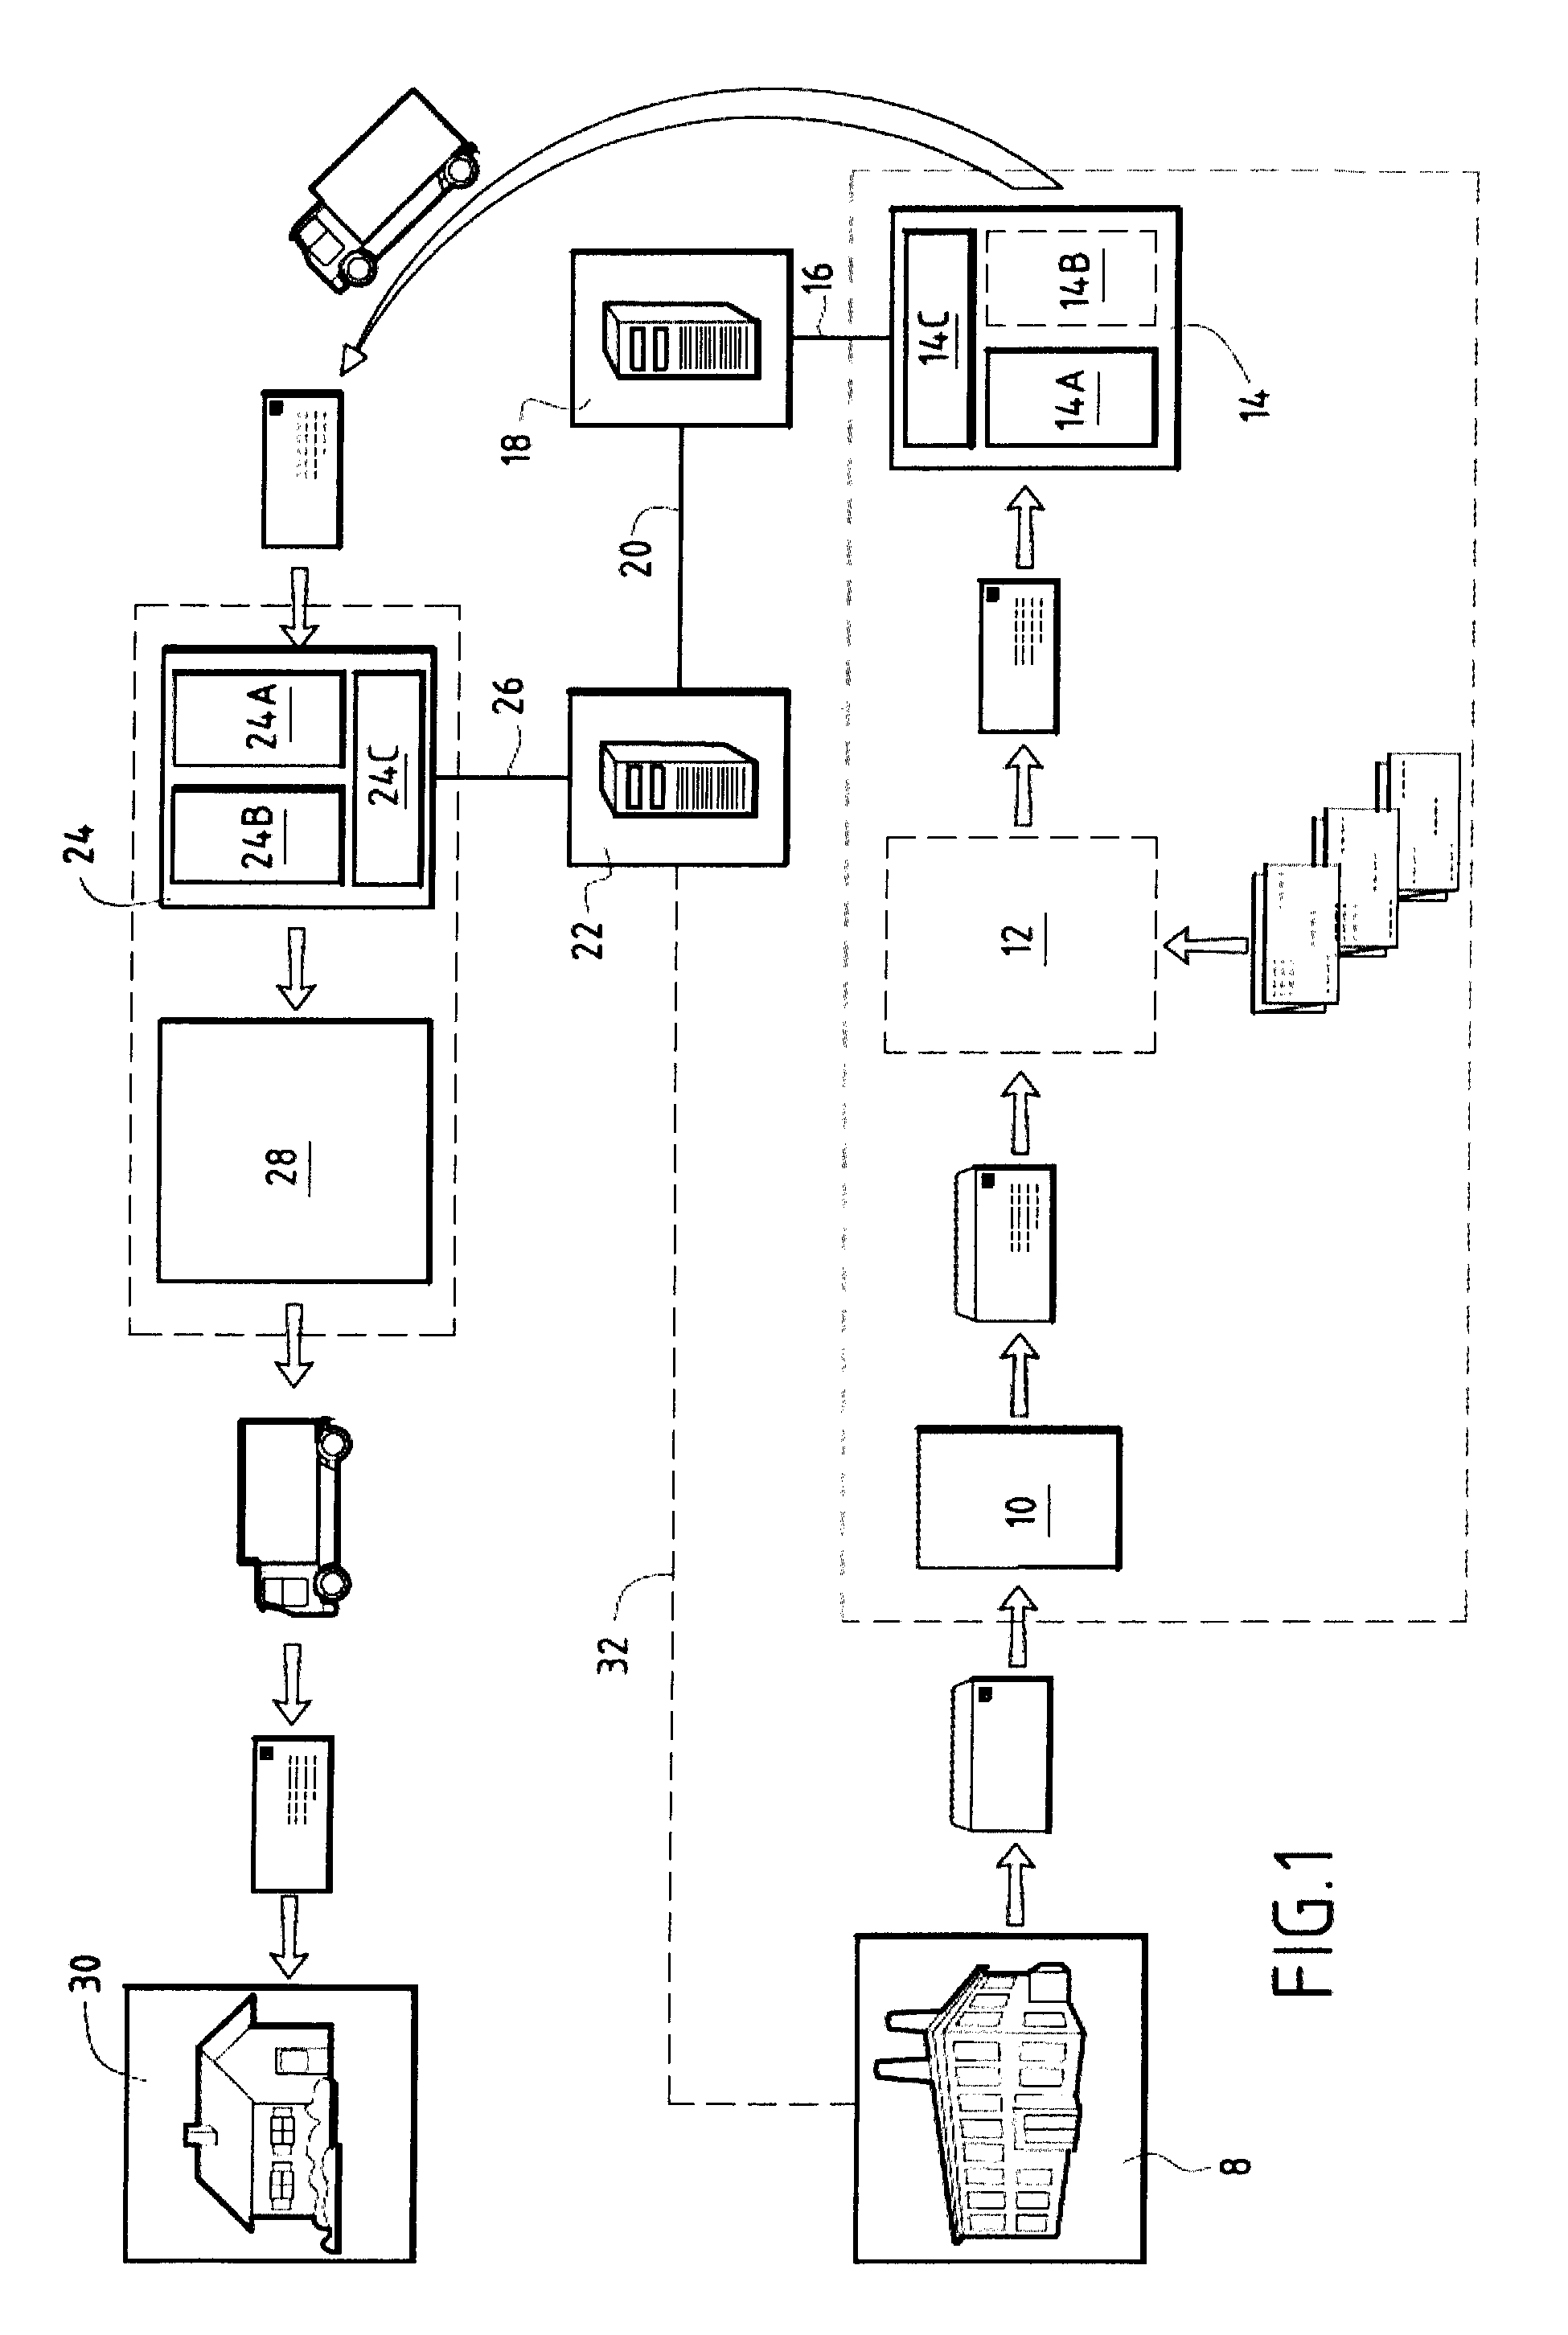 Method and system for validating and verifying mail items